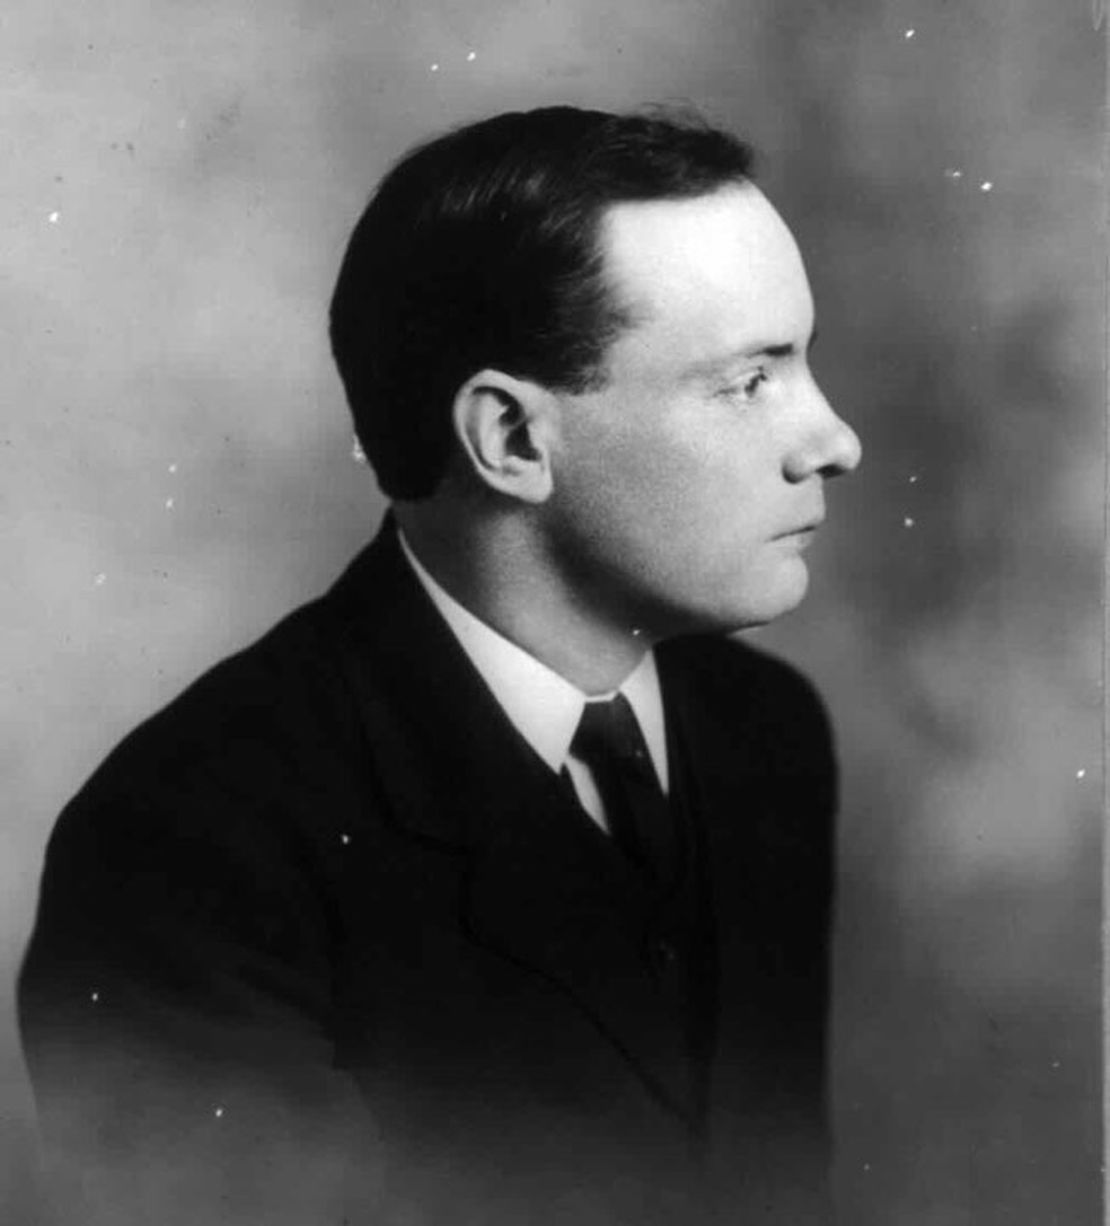 Patrick Pearse denies rumors of a possible rising to Irish Volunteer Chief of Staff Eoin MacNeill